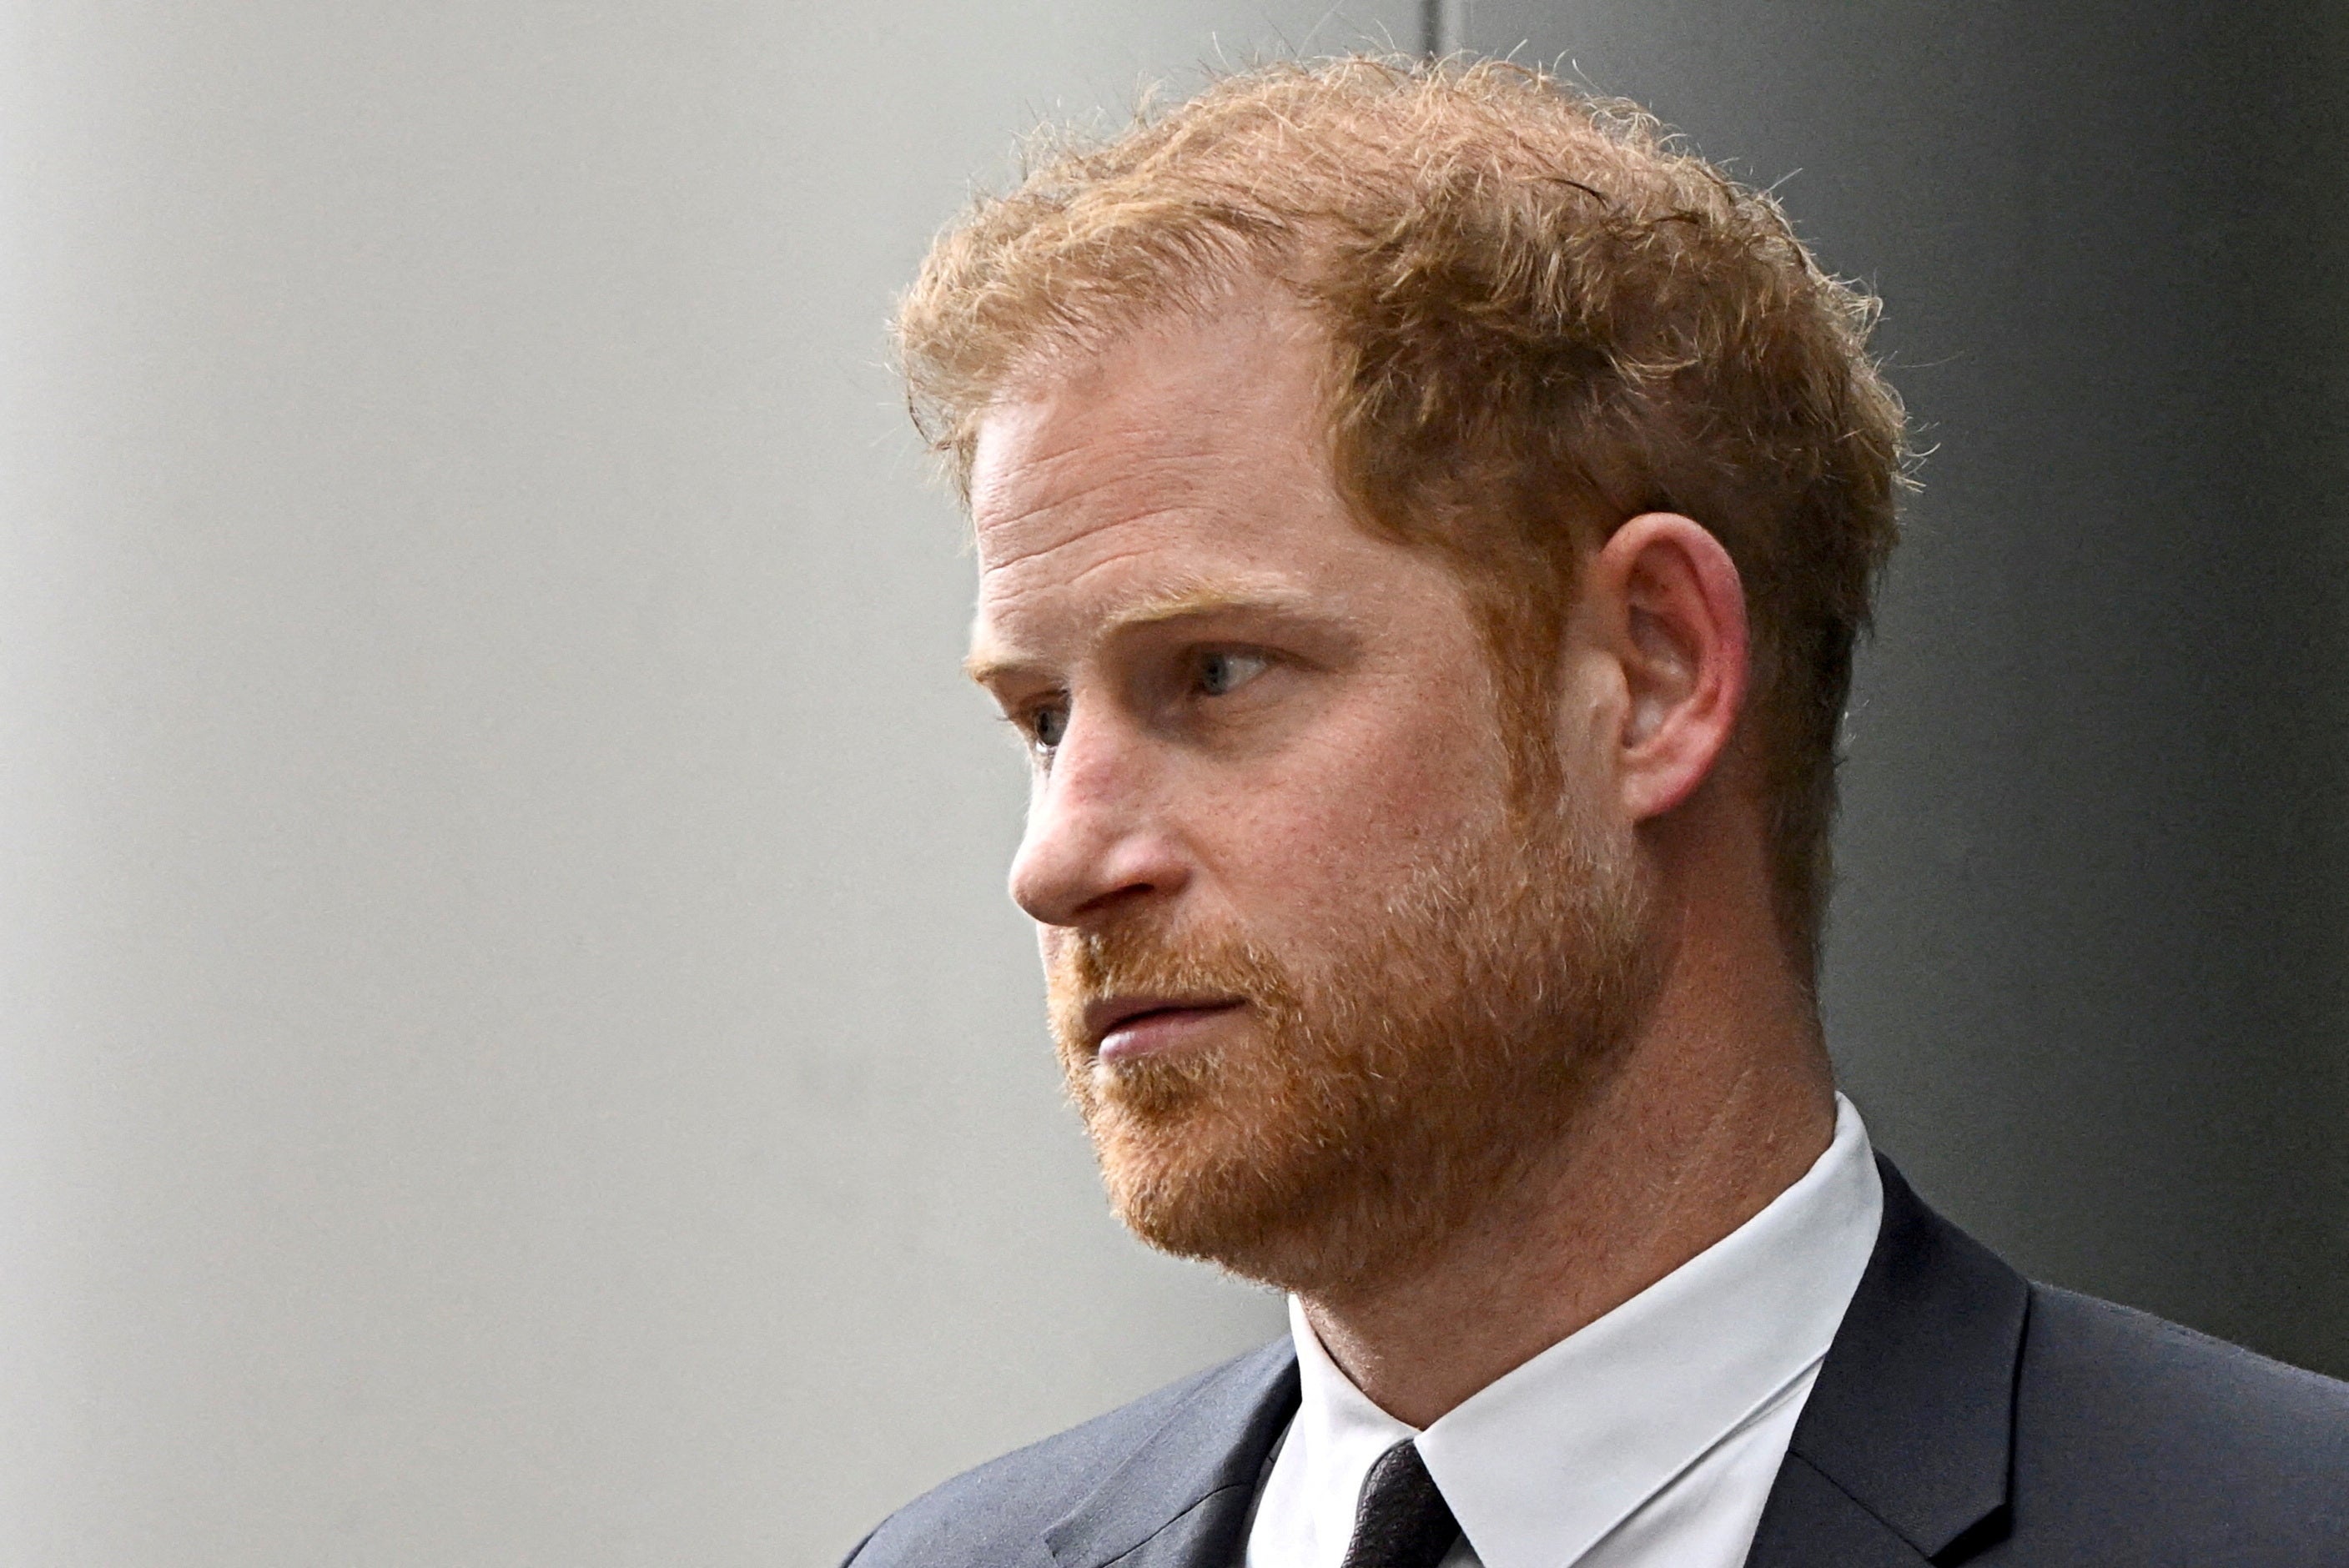 Within Prince Harry’s own family, there are much greater causes of concern than the size of his security detail